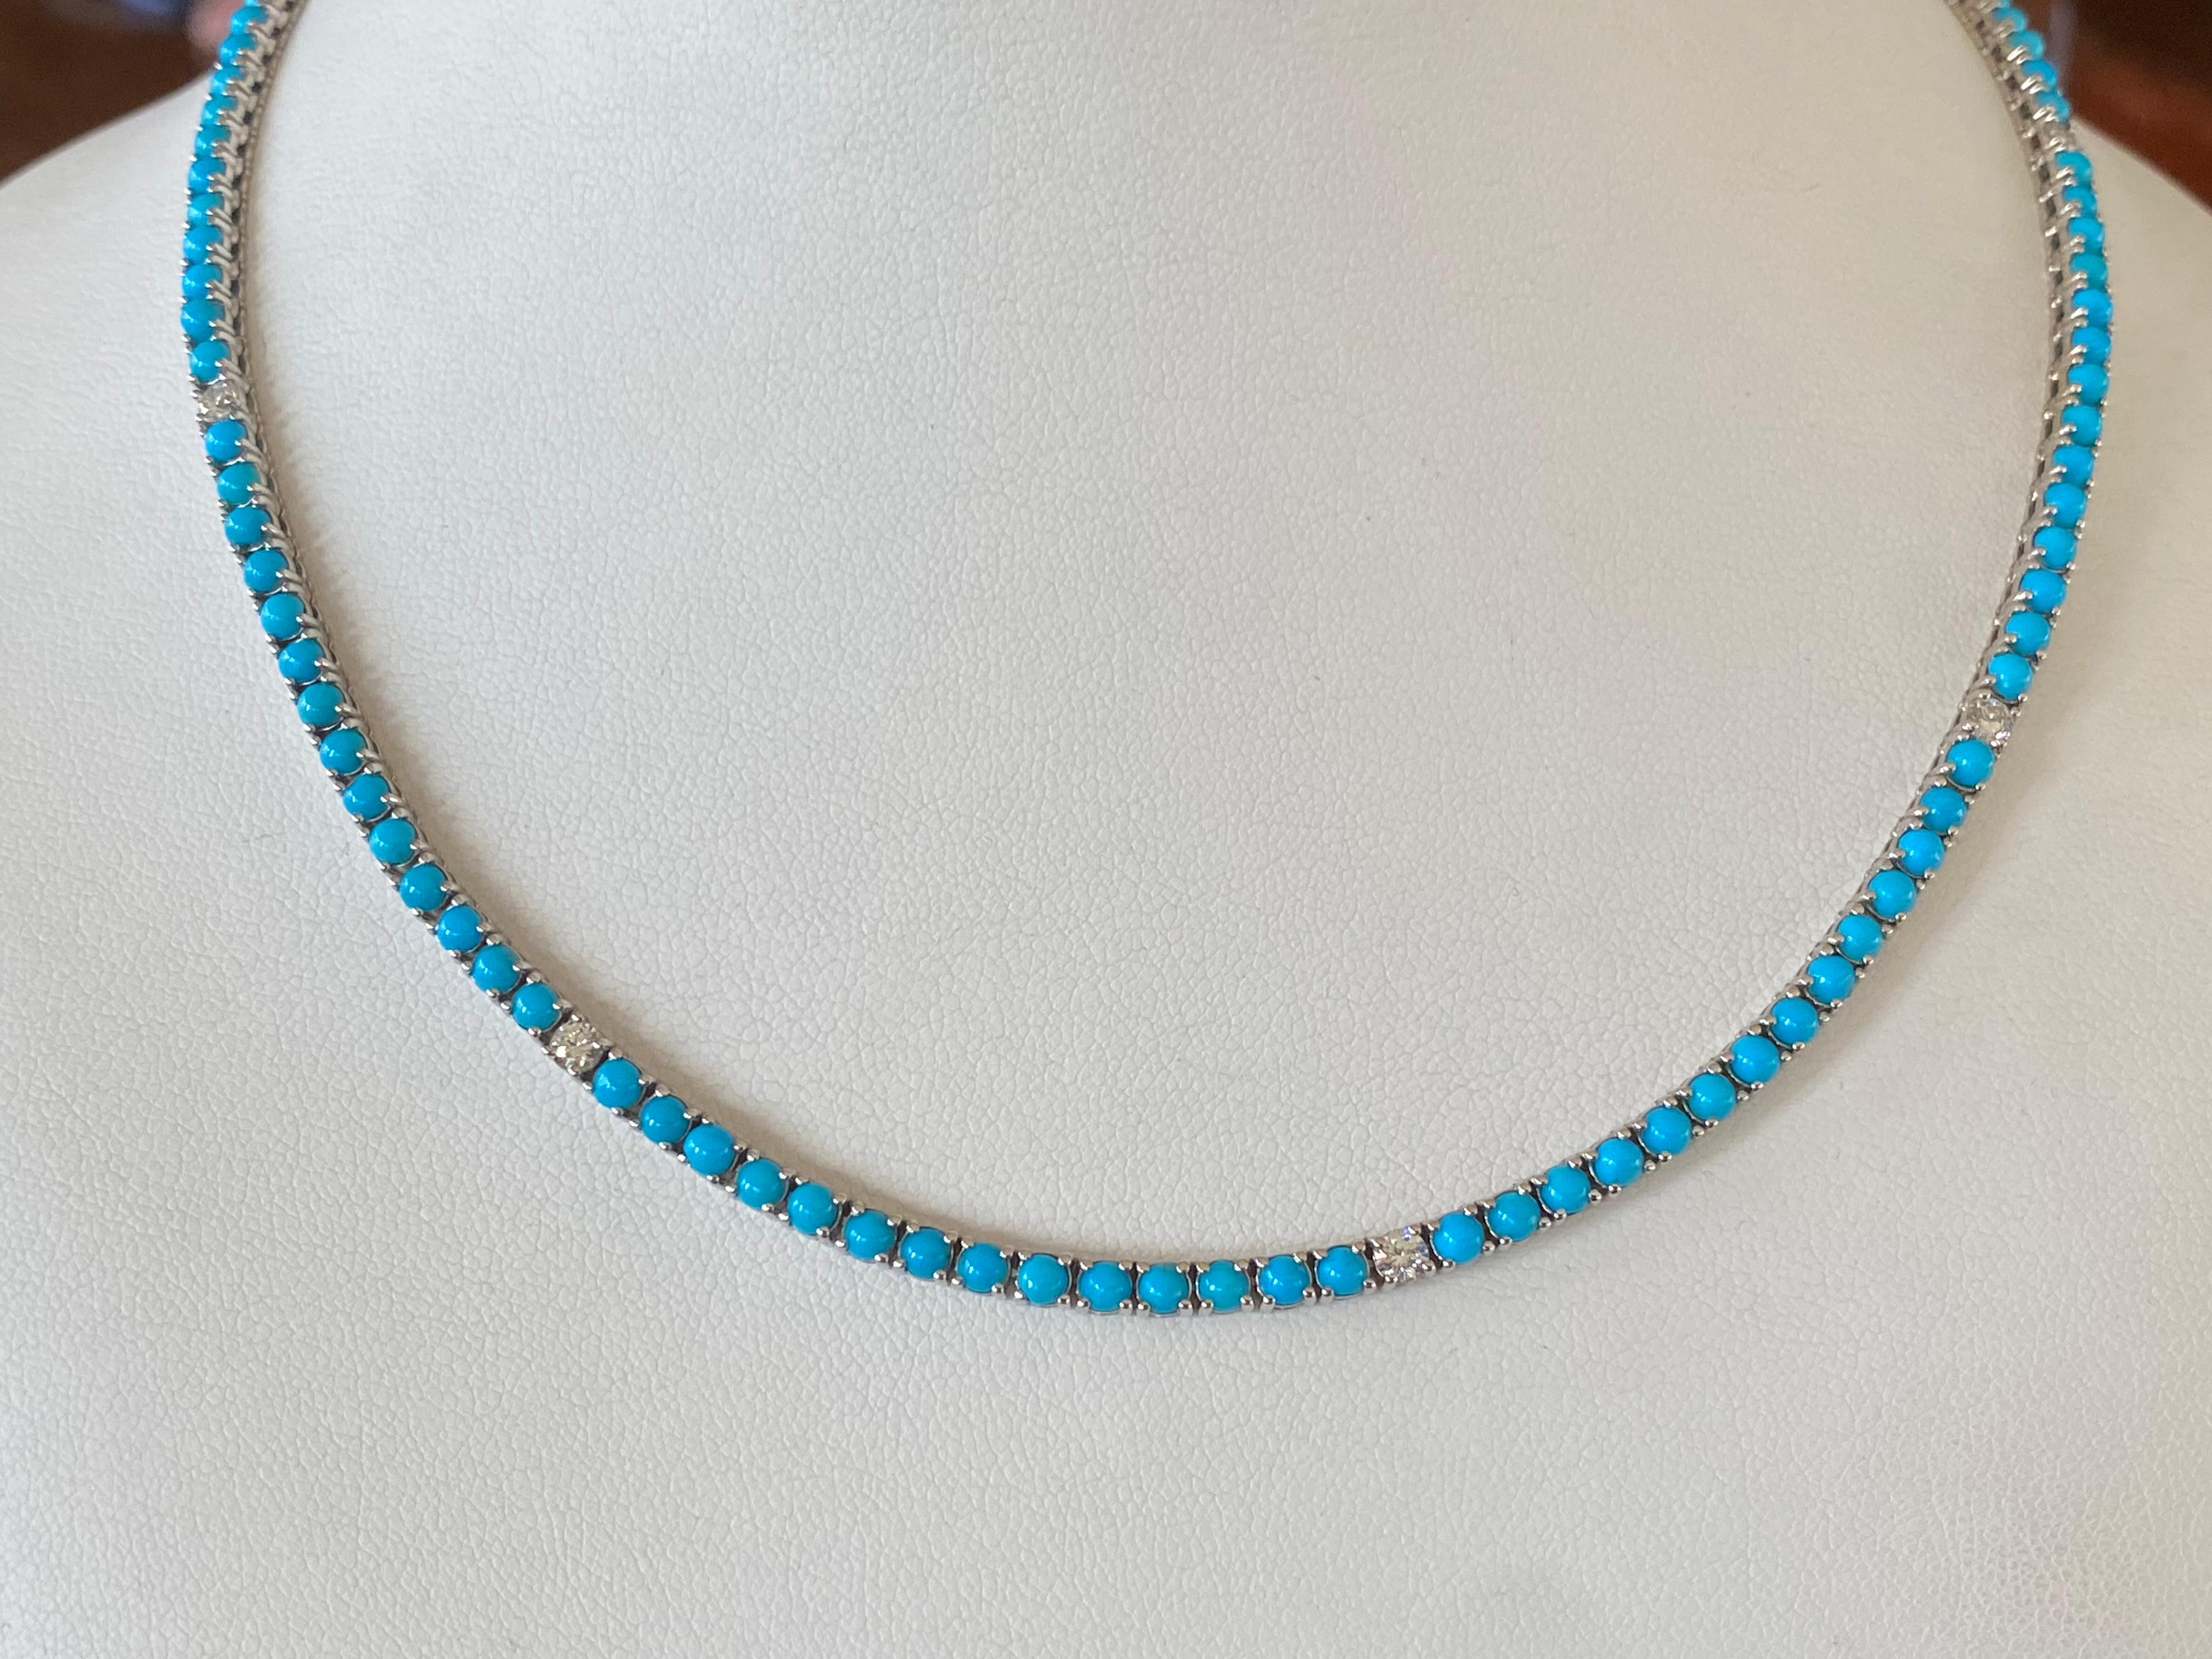 This exquisite tennis necklace handcrafted in 14kt white gold features 122 natural fine turquoise round-shaped cabochon beads mined in Arizona interspersed with 9 natural round diamonds totaling 0.90 carats, G-H color, SI clarity. The necklace